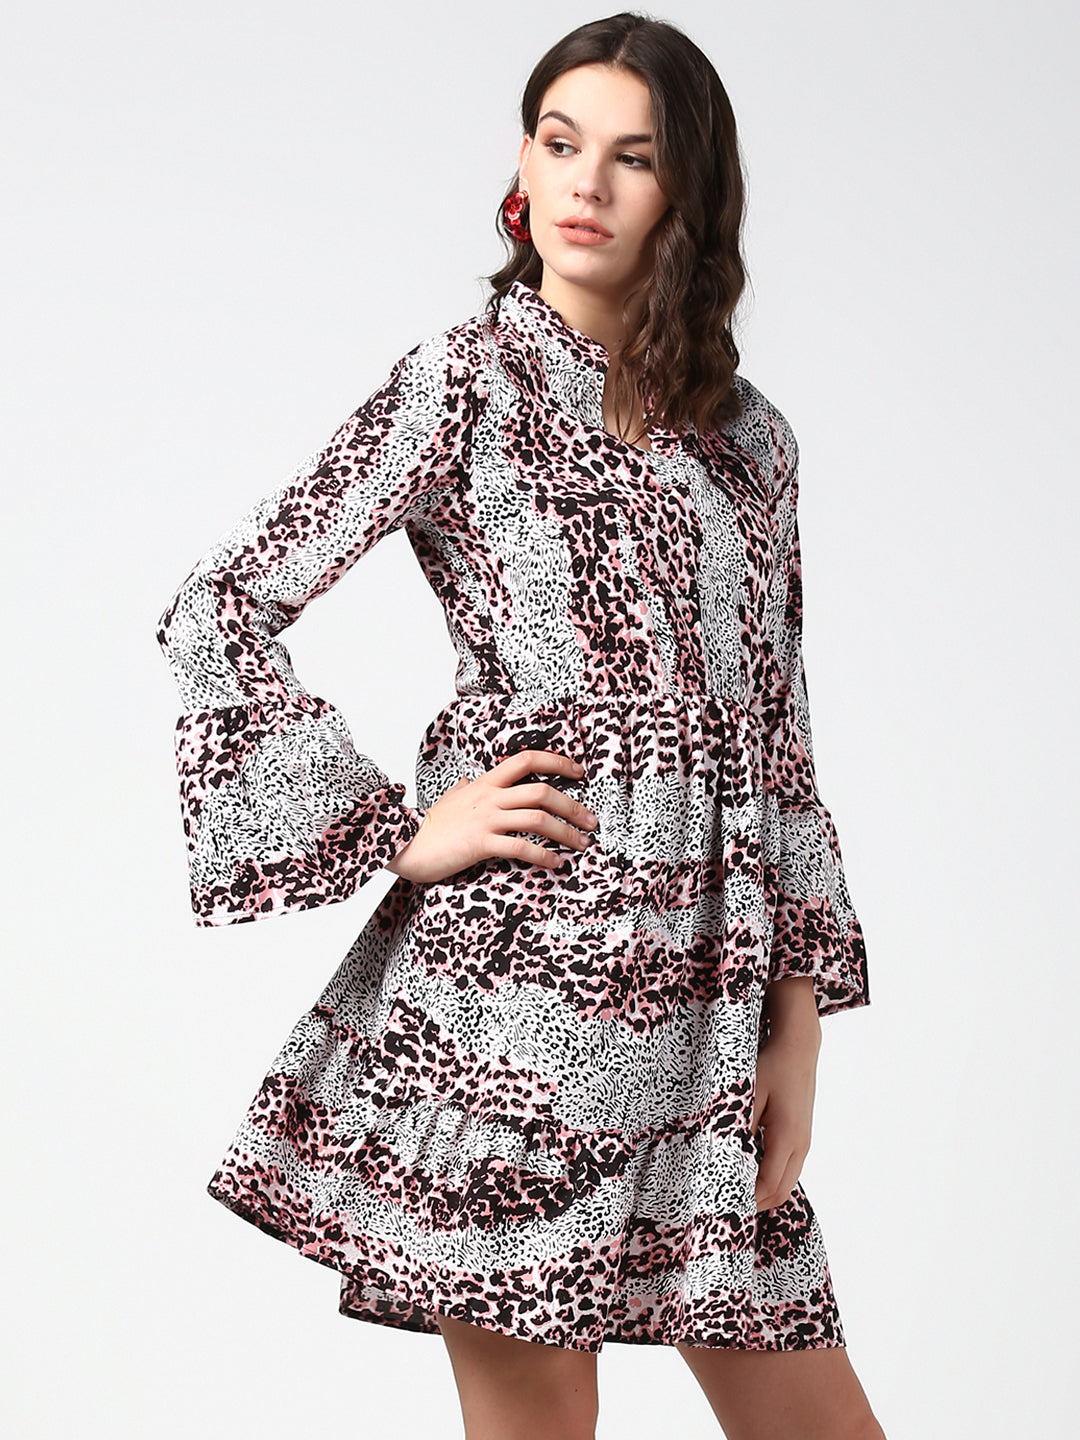 Women's Pink and Black Animal Print Dress with Bell Sleeves